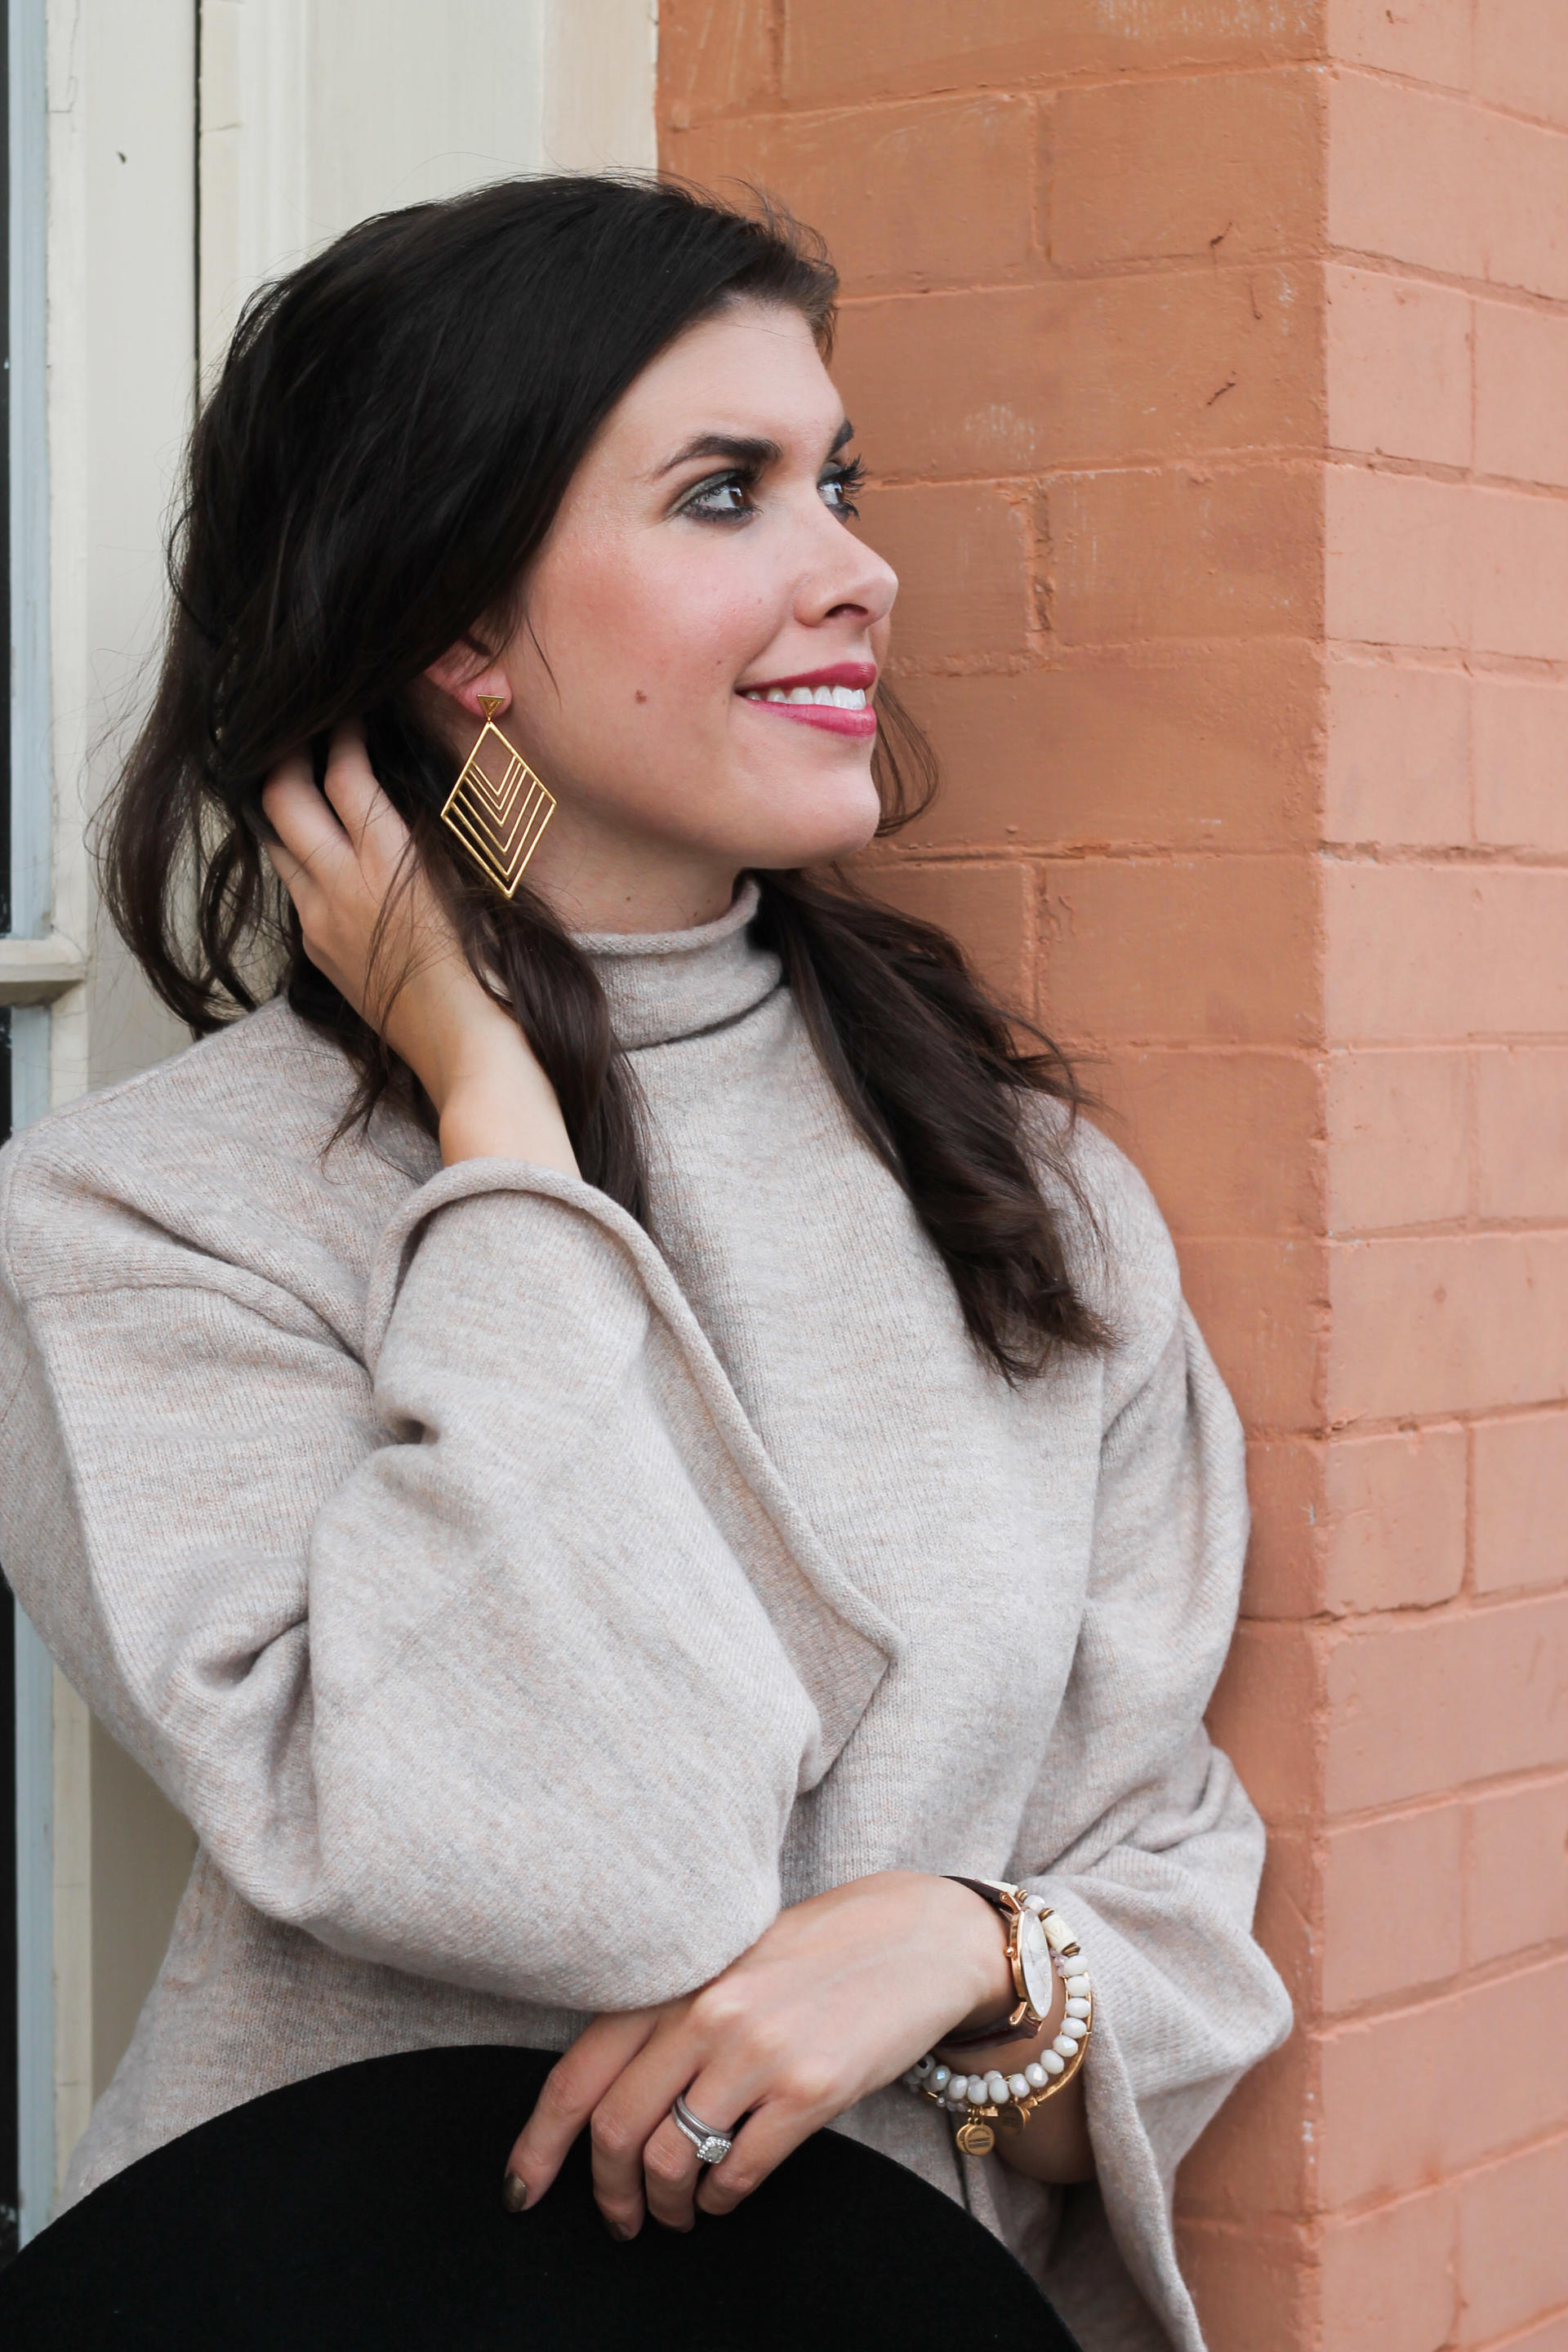 Bell Sleeve Sweater by New Orleans fashion blogger Style Waltz